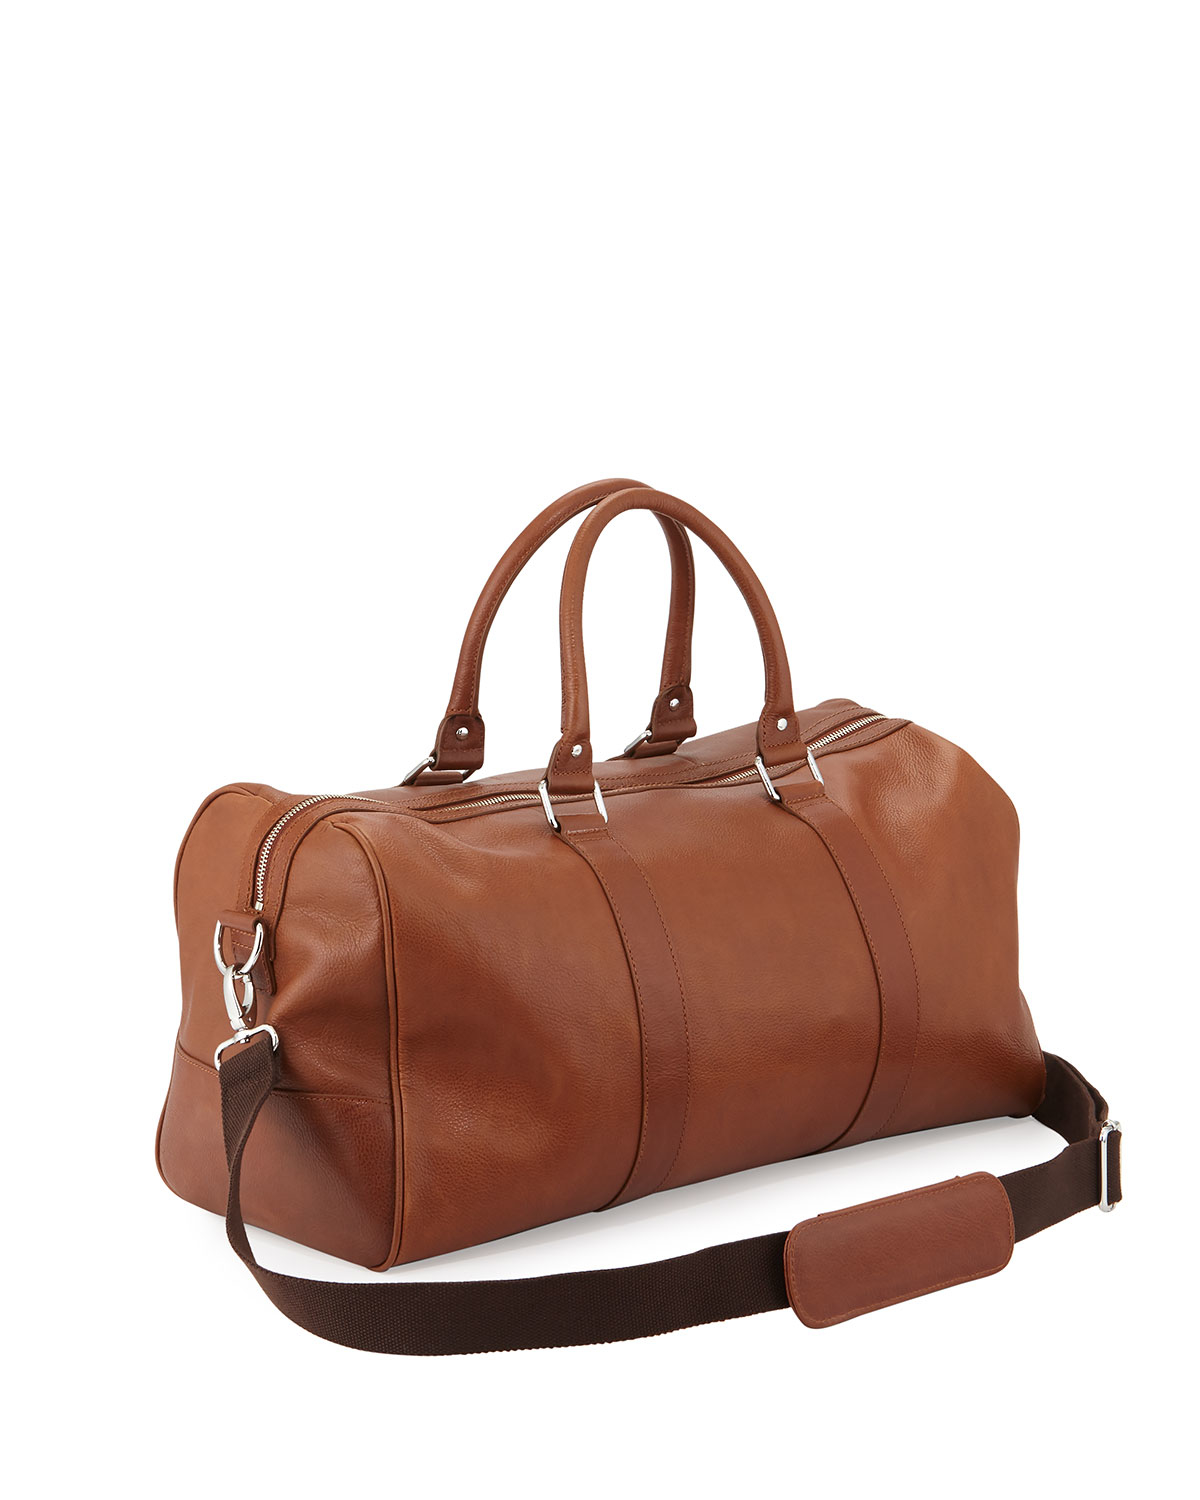 Lyst - Cole Haan Large Leather Duffle Bag in Brown for Men